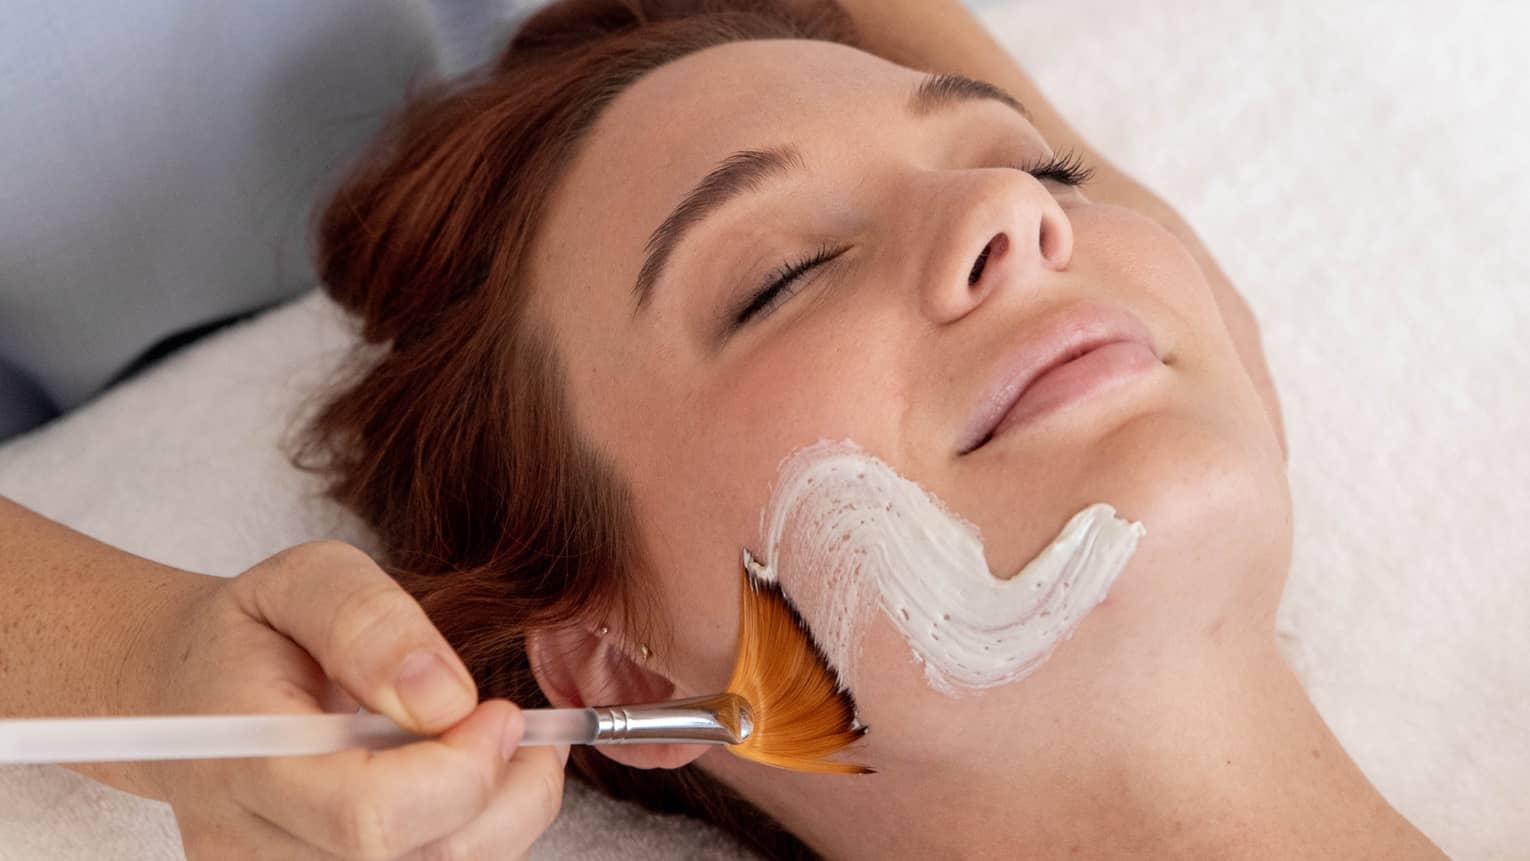 Spa staff paints white cream onto woman's face as she lays with eyes closed